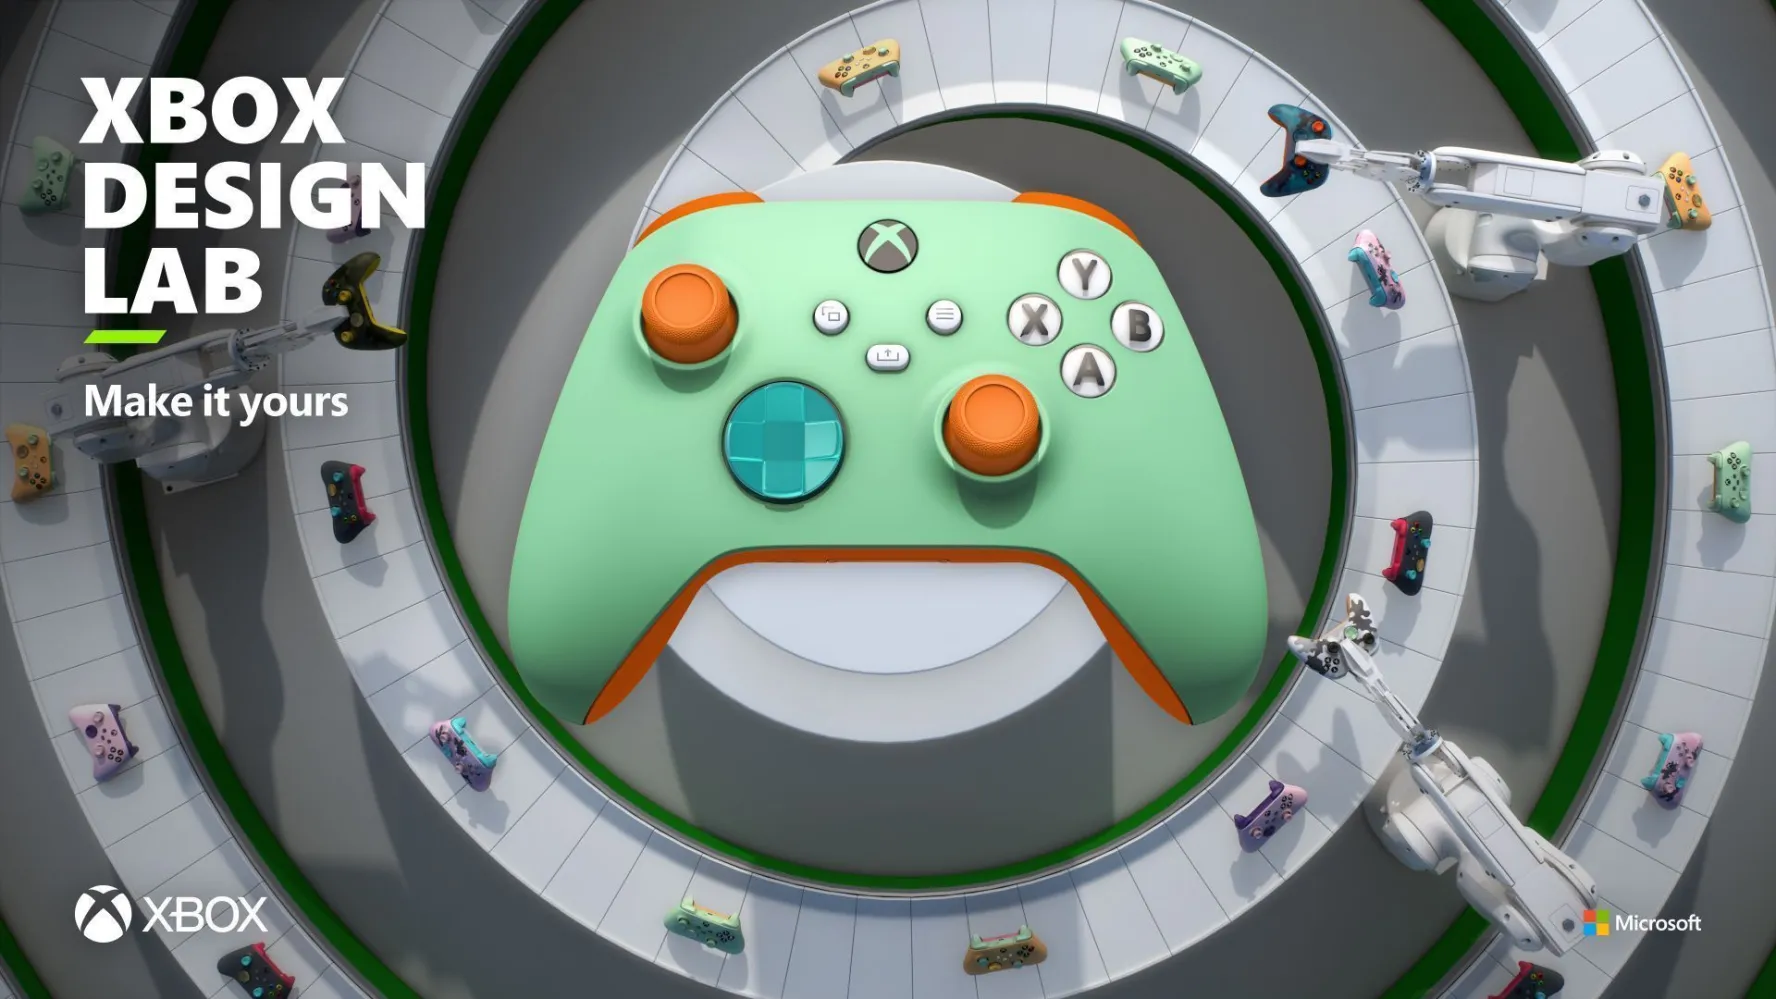 More Options to Express Yourself with Xbox Design Lab